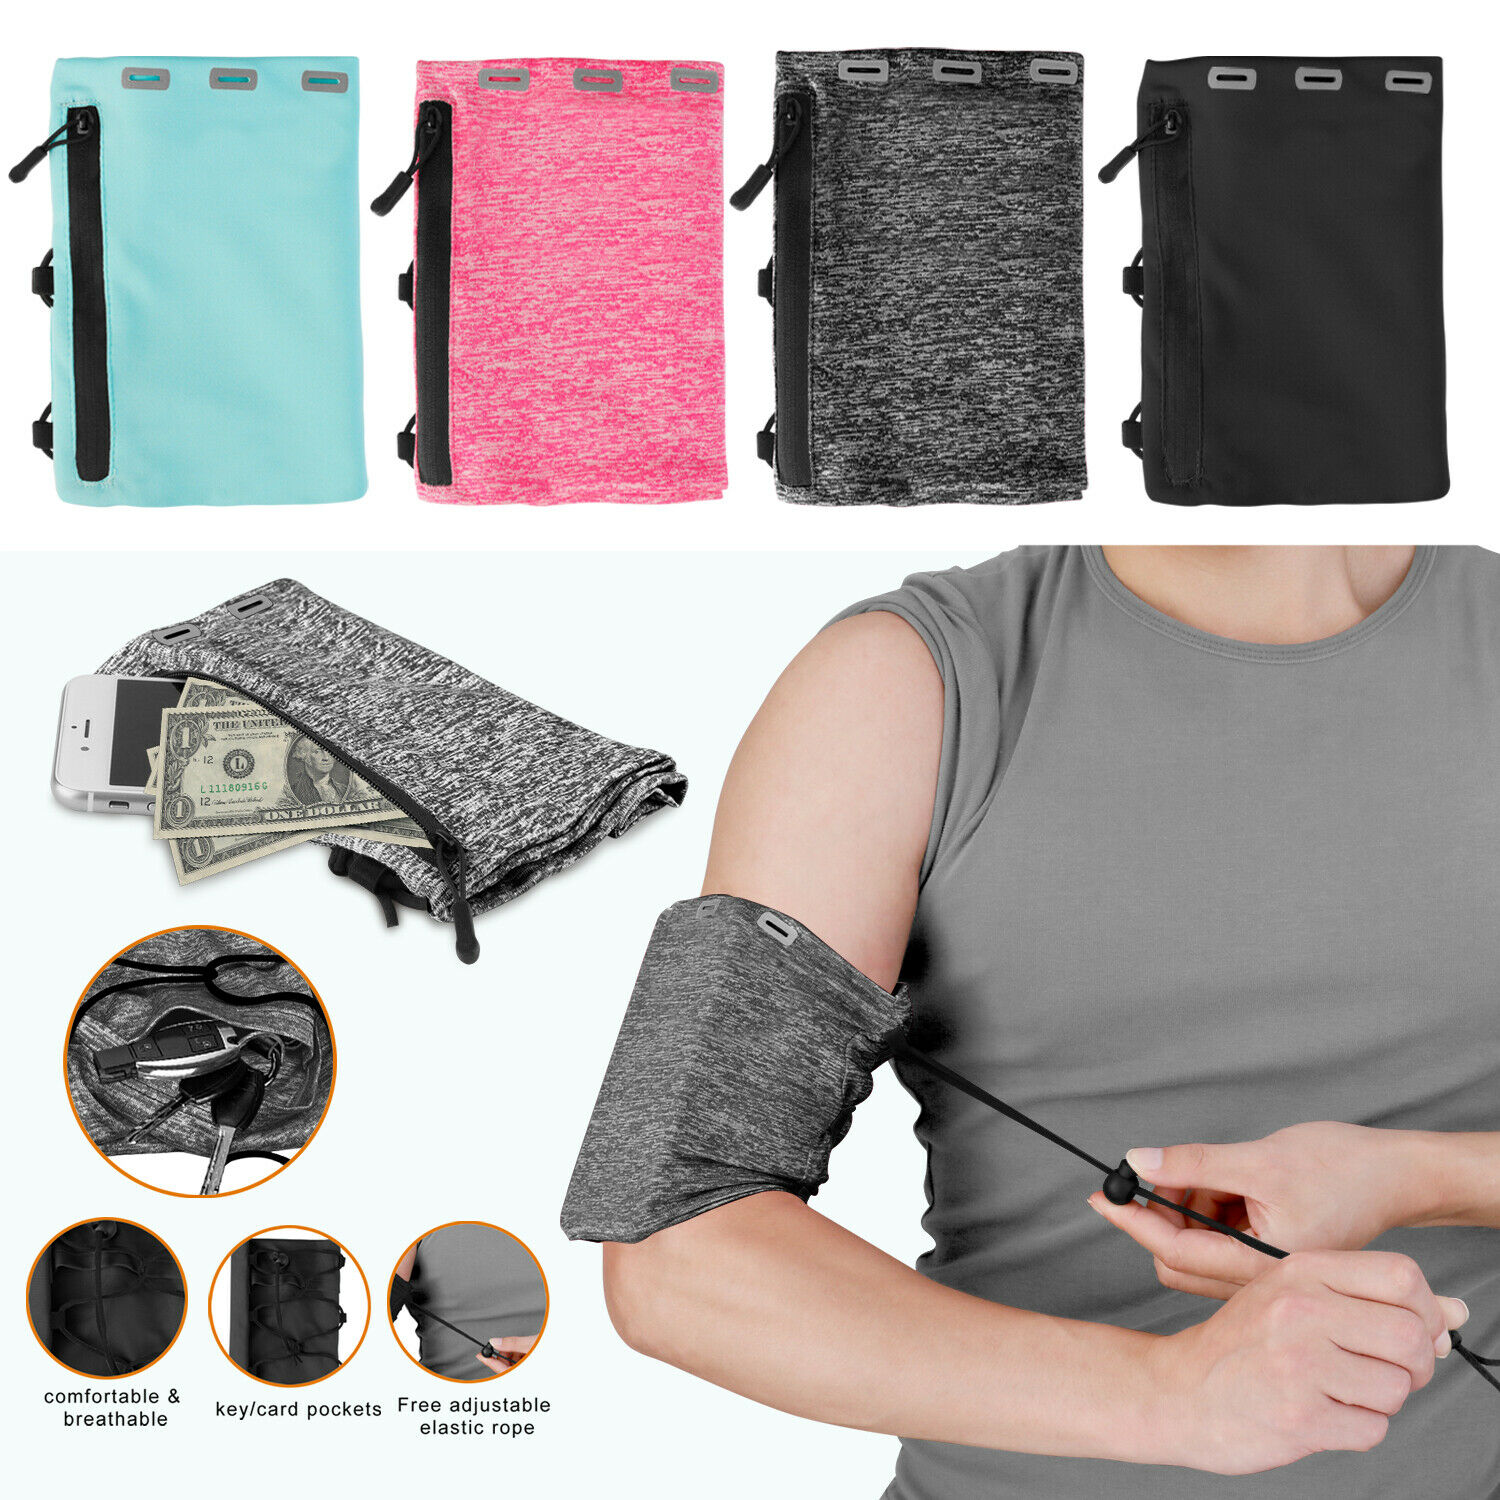 Armband Case Sports Gym Running Pouch Jogging Arm Band Cell Phone Holder Bag USA